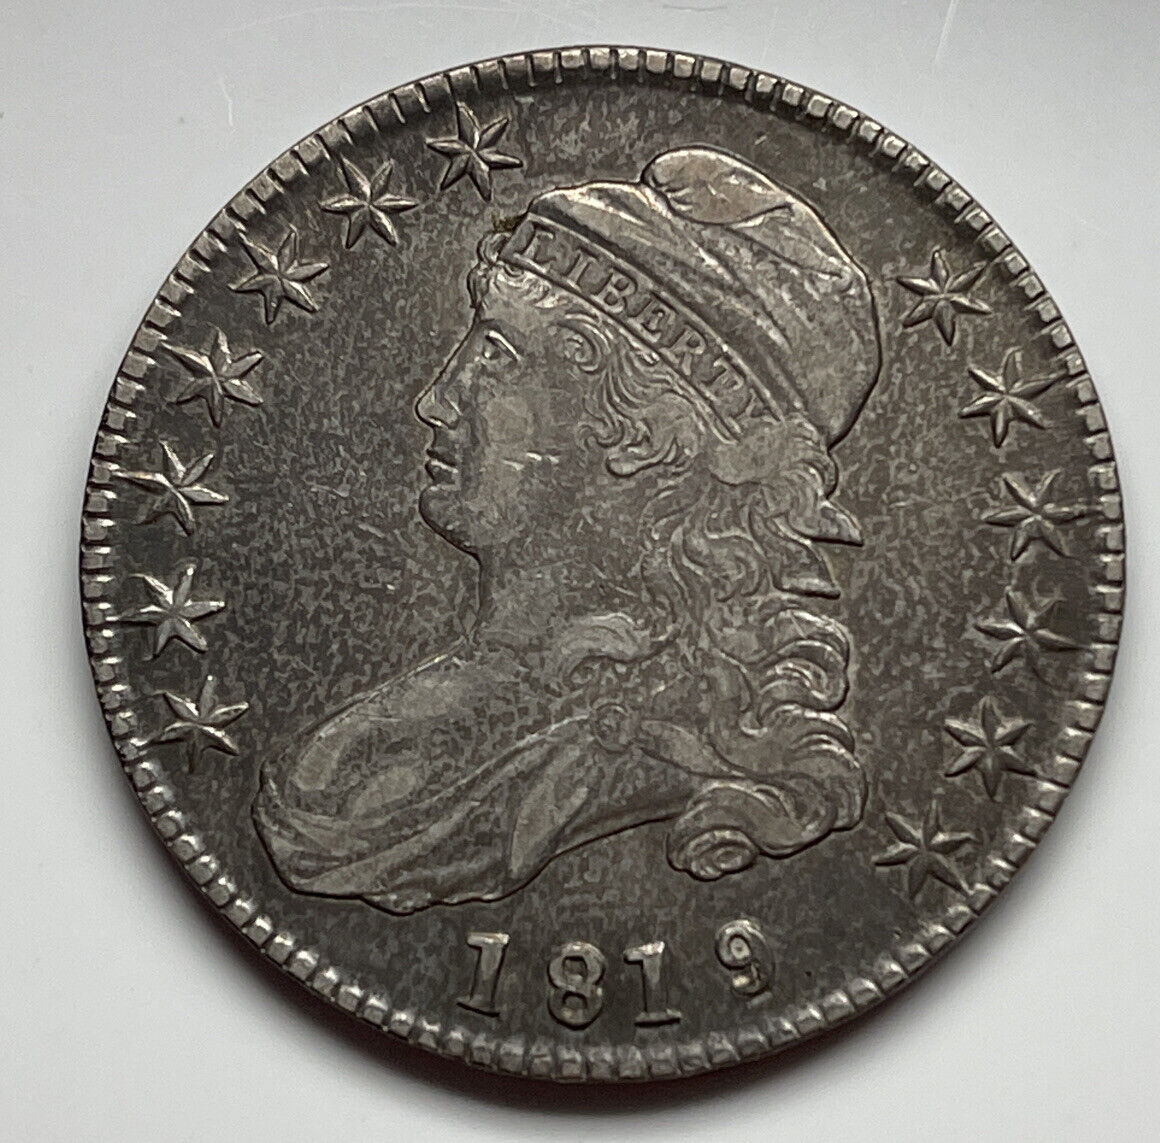 1819/8 Small 9 Us 50c Bust Capped Bust Half Dollar Xf